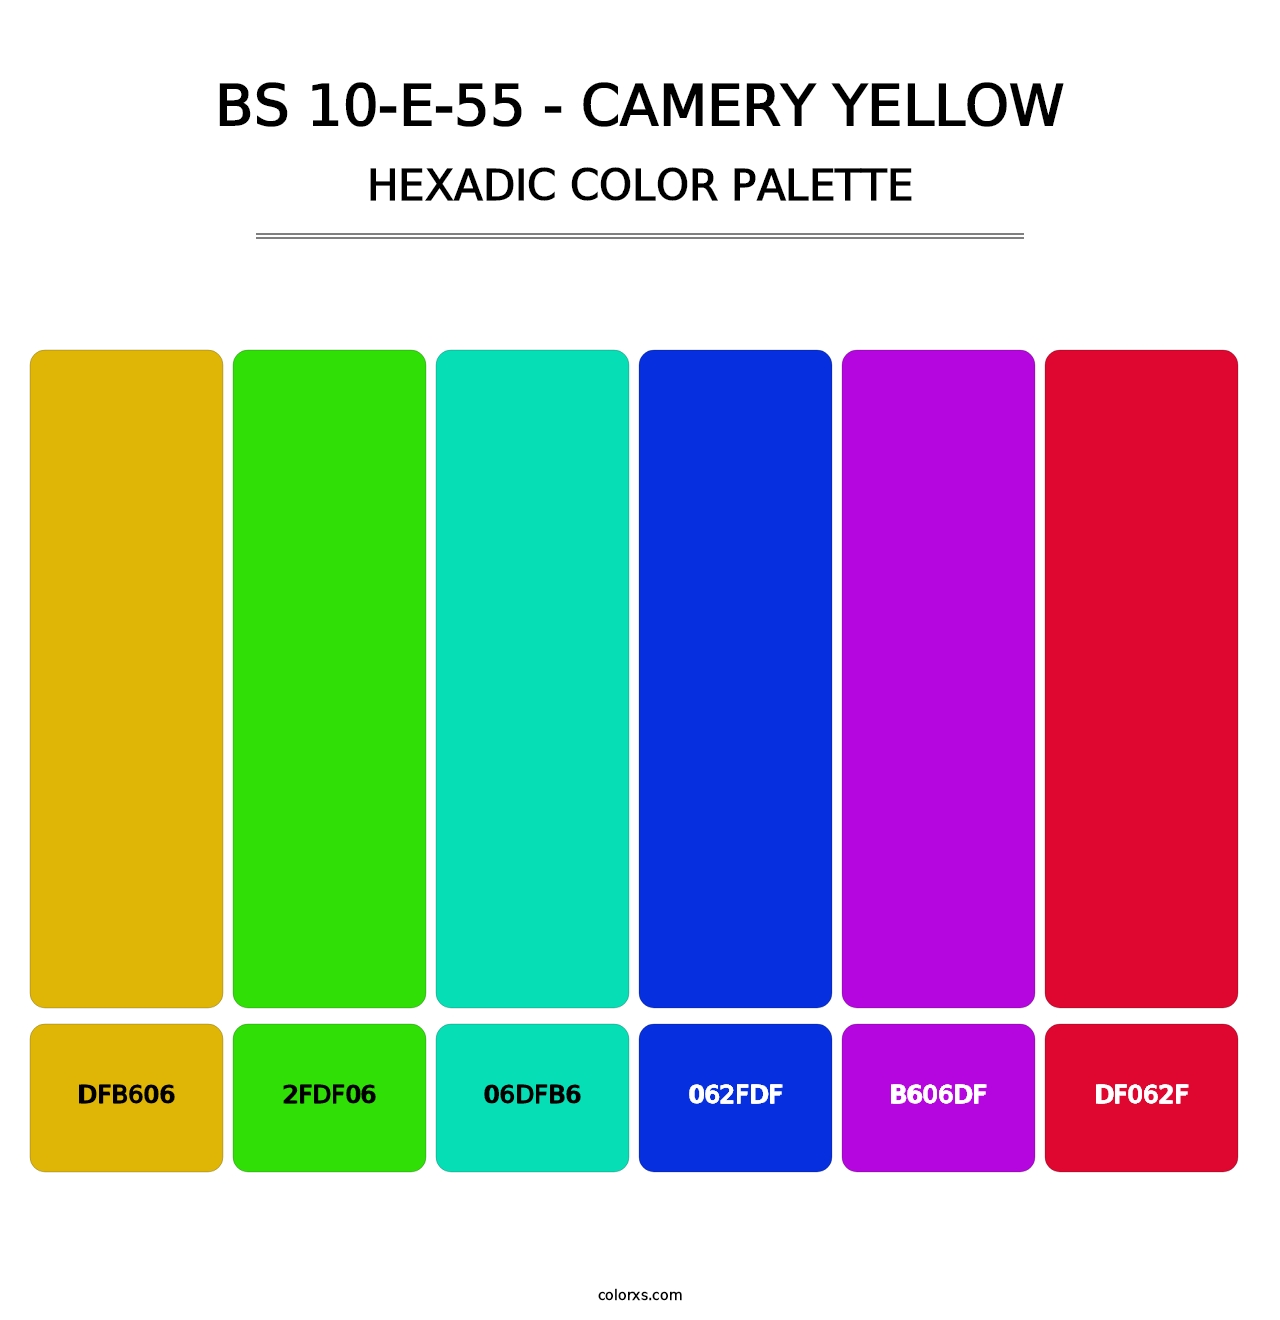 BS 10-E-55 - Camery Yellow - Hexadic Color Palette